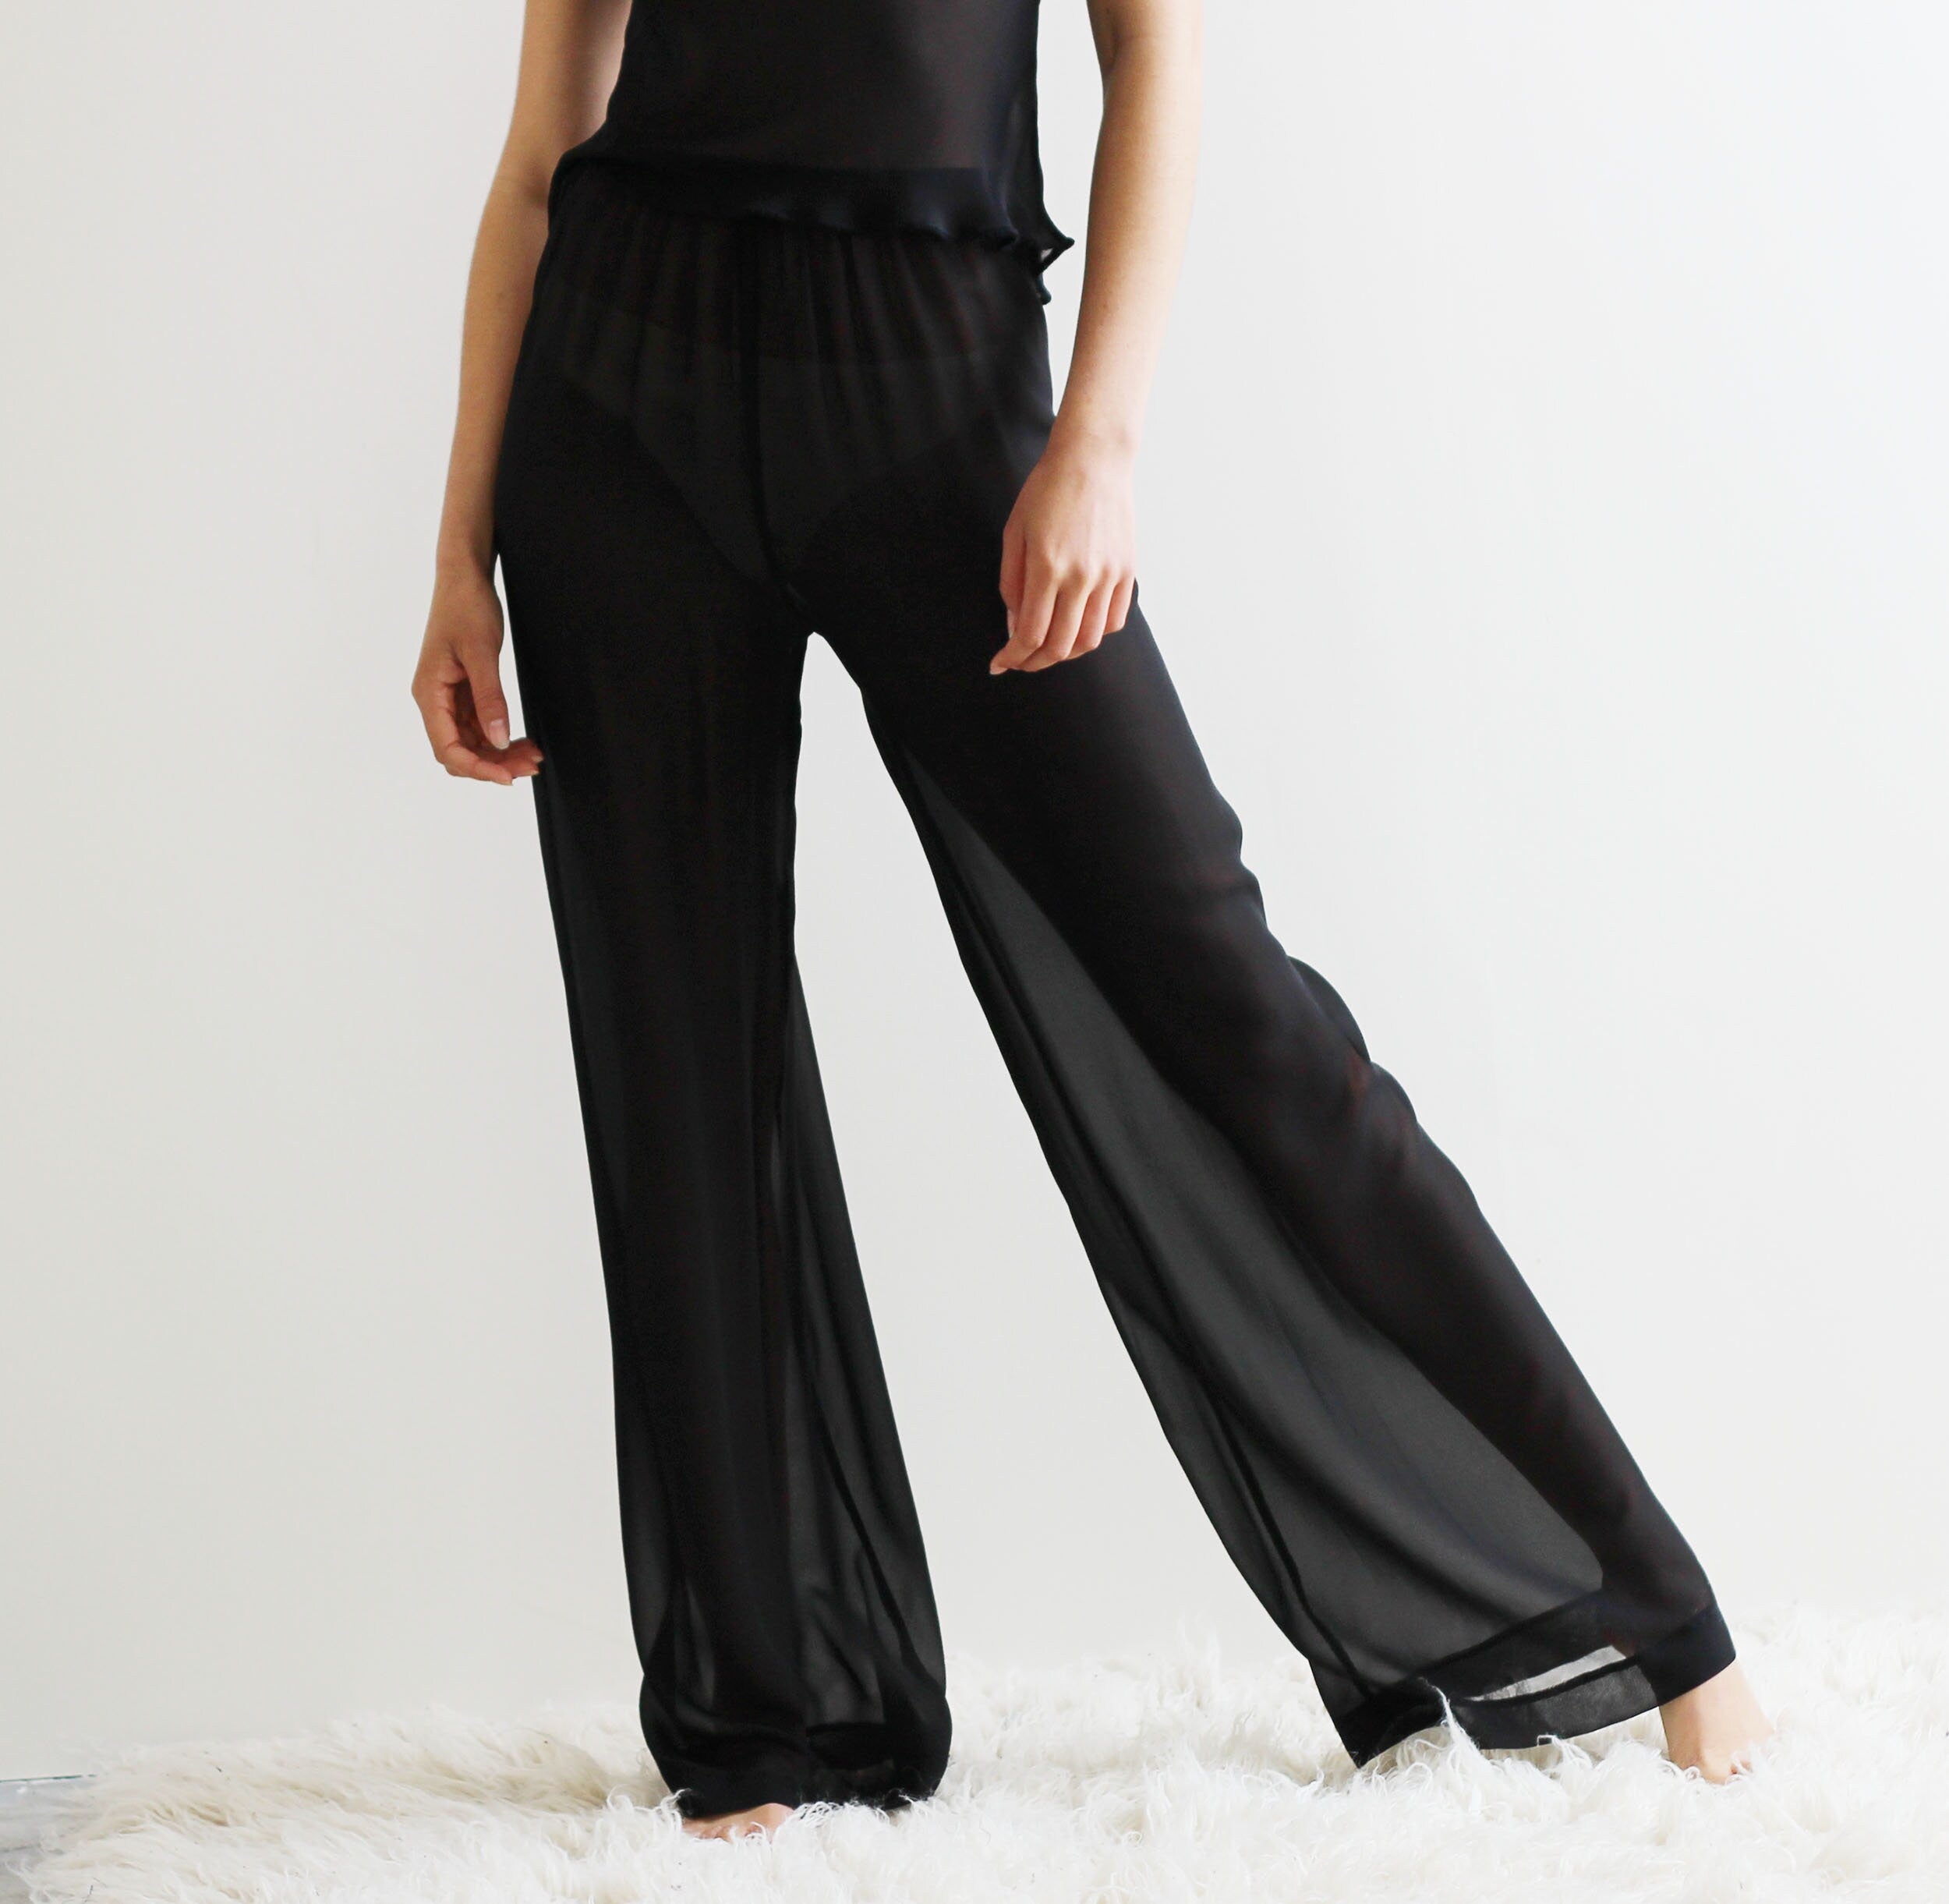 Silk Georgette Pants with palazzo legs and high waist, Silk Pajamas, Sheer Lingerie - made to order